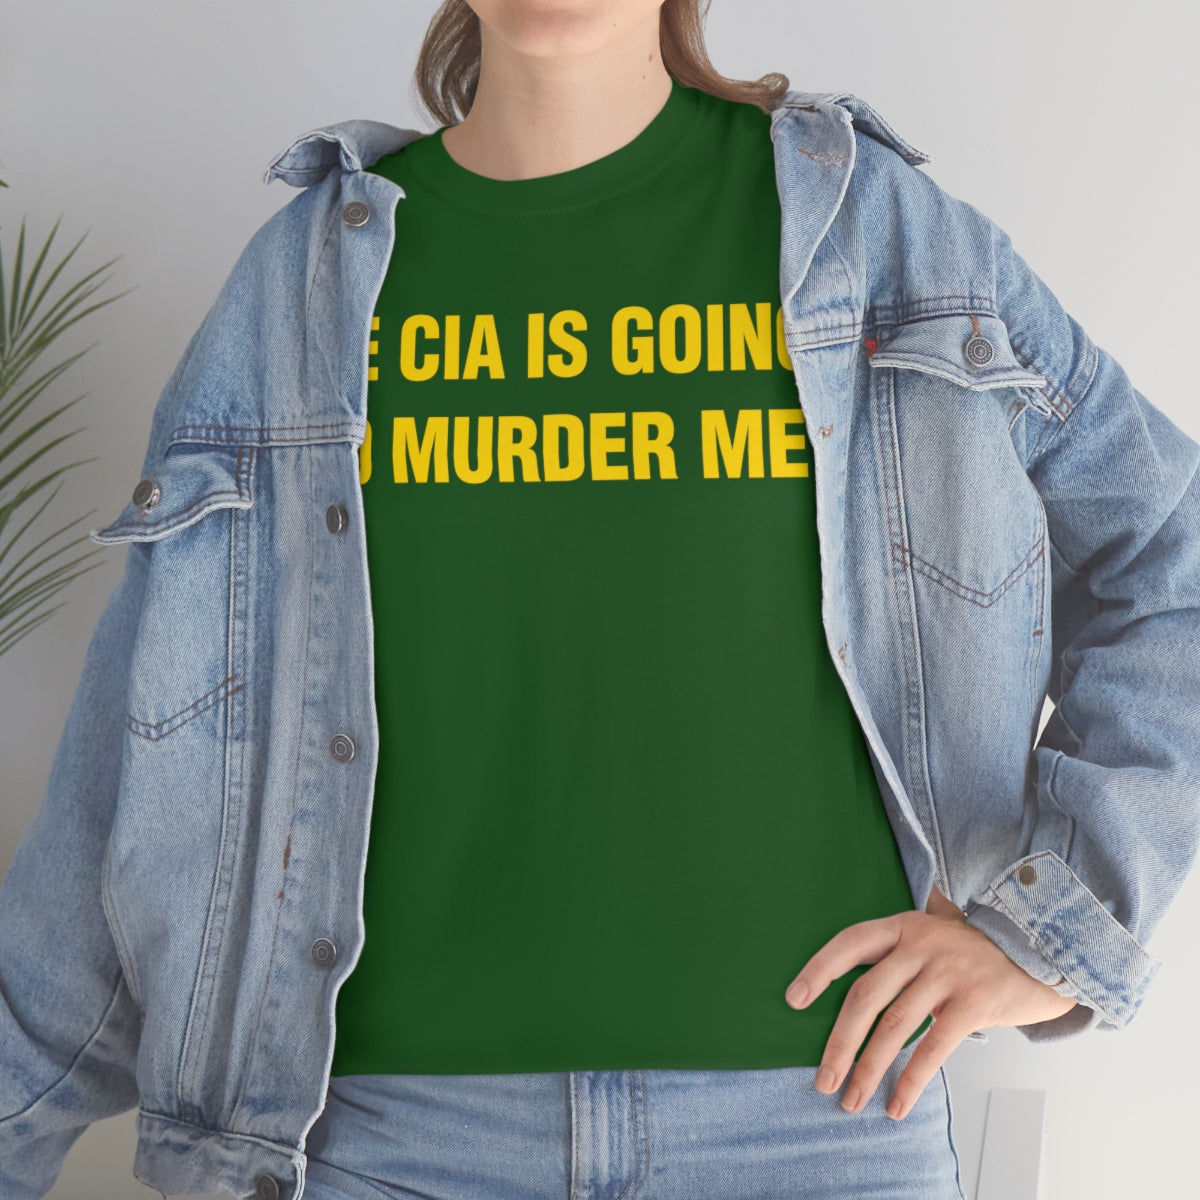 THE CIA IS GOING  TO MURDER ME TEE